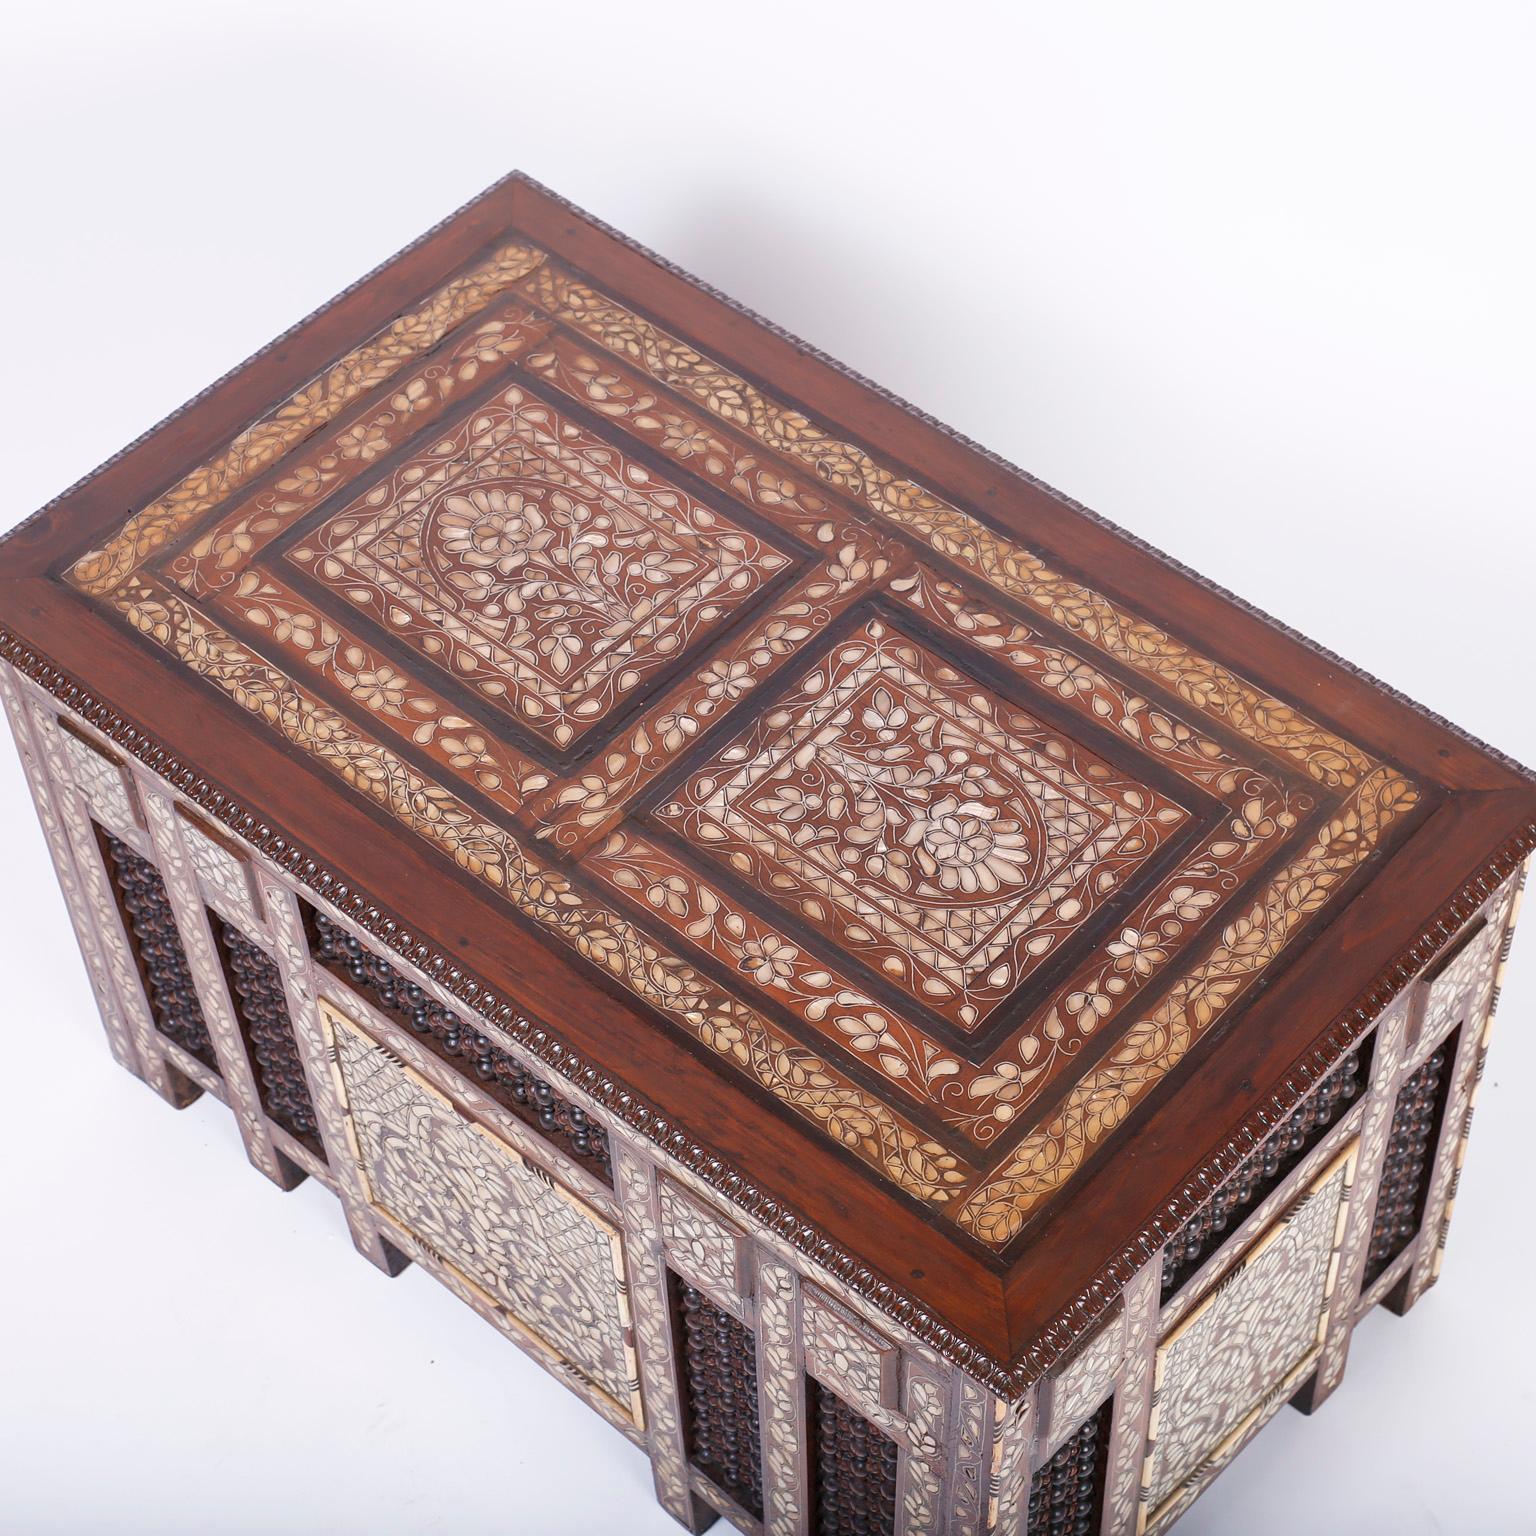 Inlay Anglo-Indian or Syrian Rectangular Inlaid Coffee Table